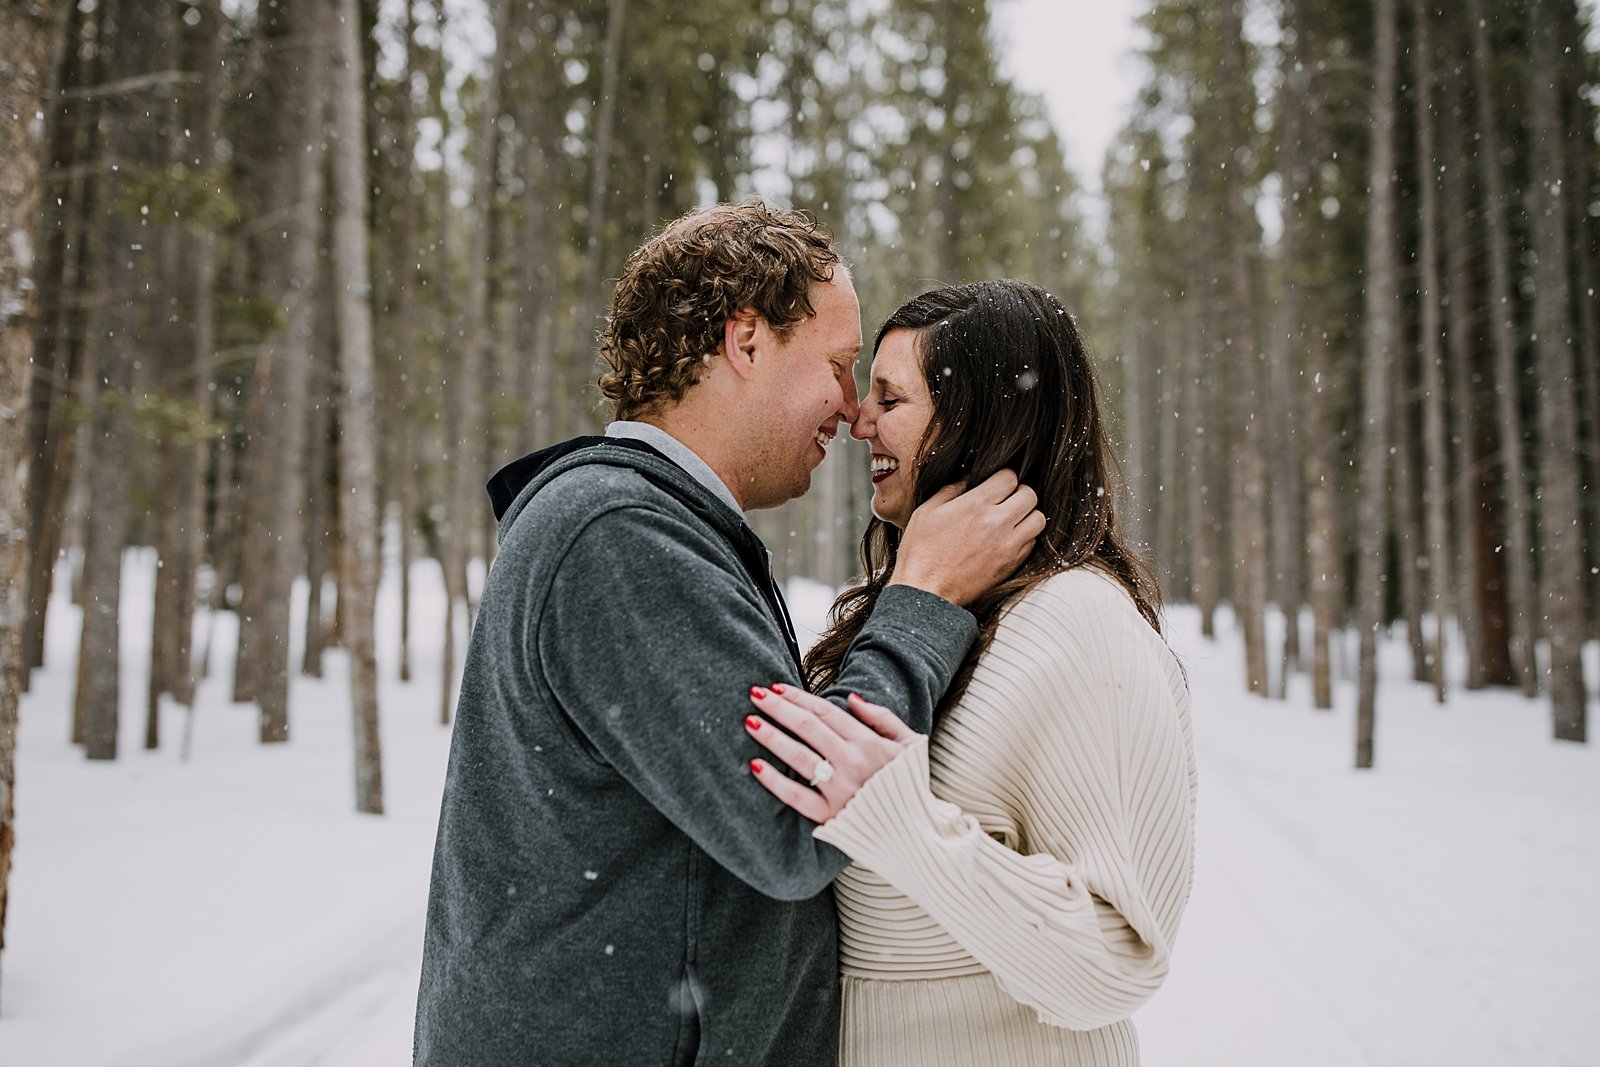 couple nuzzling noses in the snow, golden horseshoe sleigh ride photographer, golden horseshoe sleigh ride proposal photographer, good times adventures photographer, snowy mountain engagement